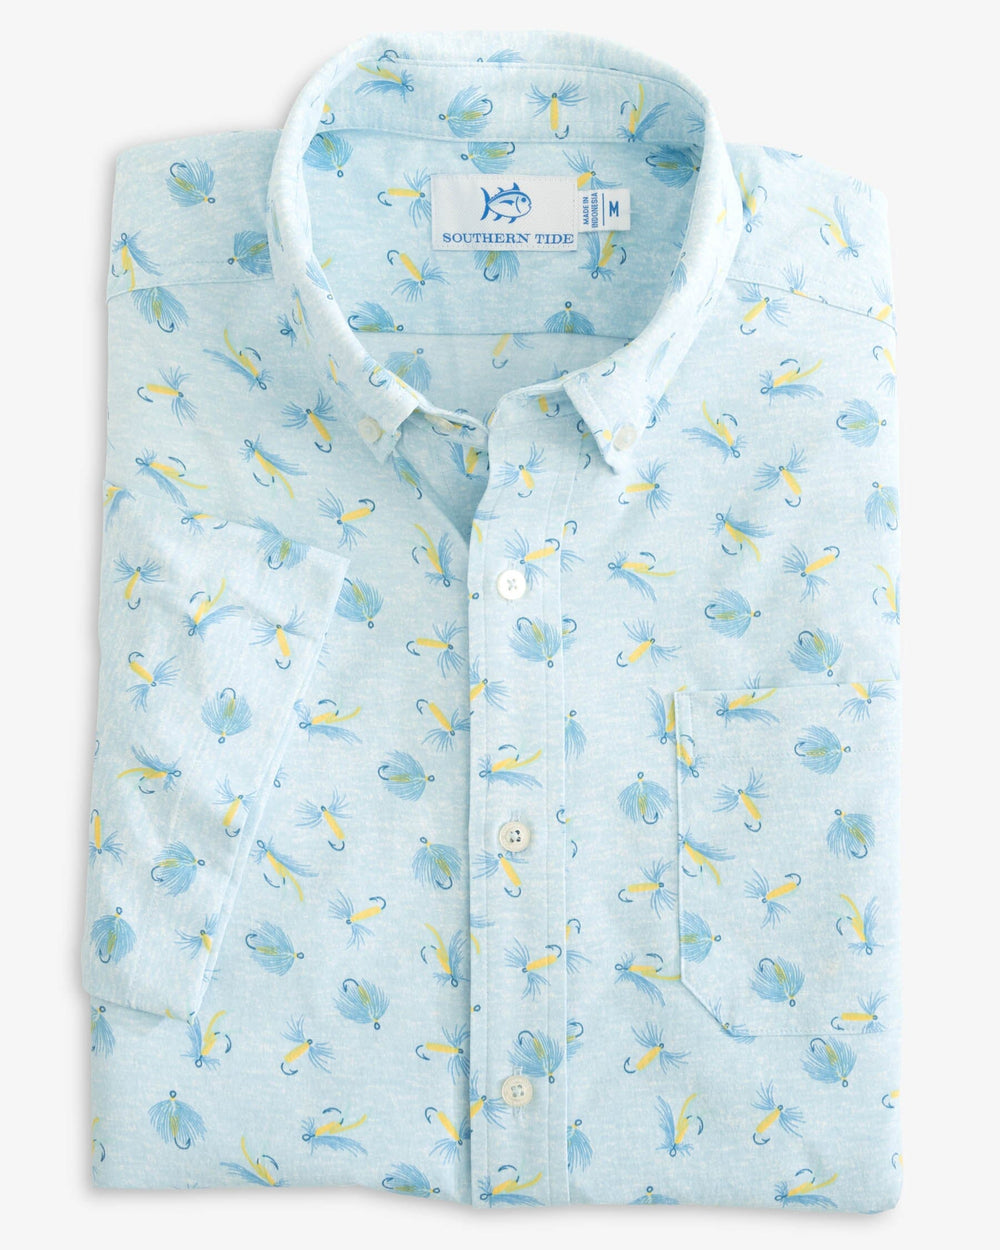 The folded view of the Southern Tide Heather Guy with Allure Intercoastal Short Sleeve Button Down Shirt by Southern Tide - Heather Rain Water